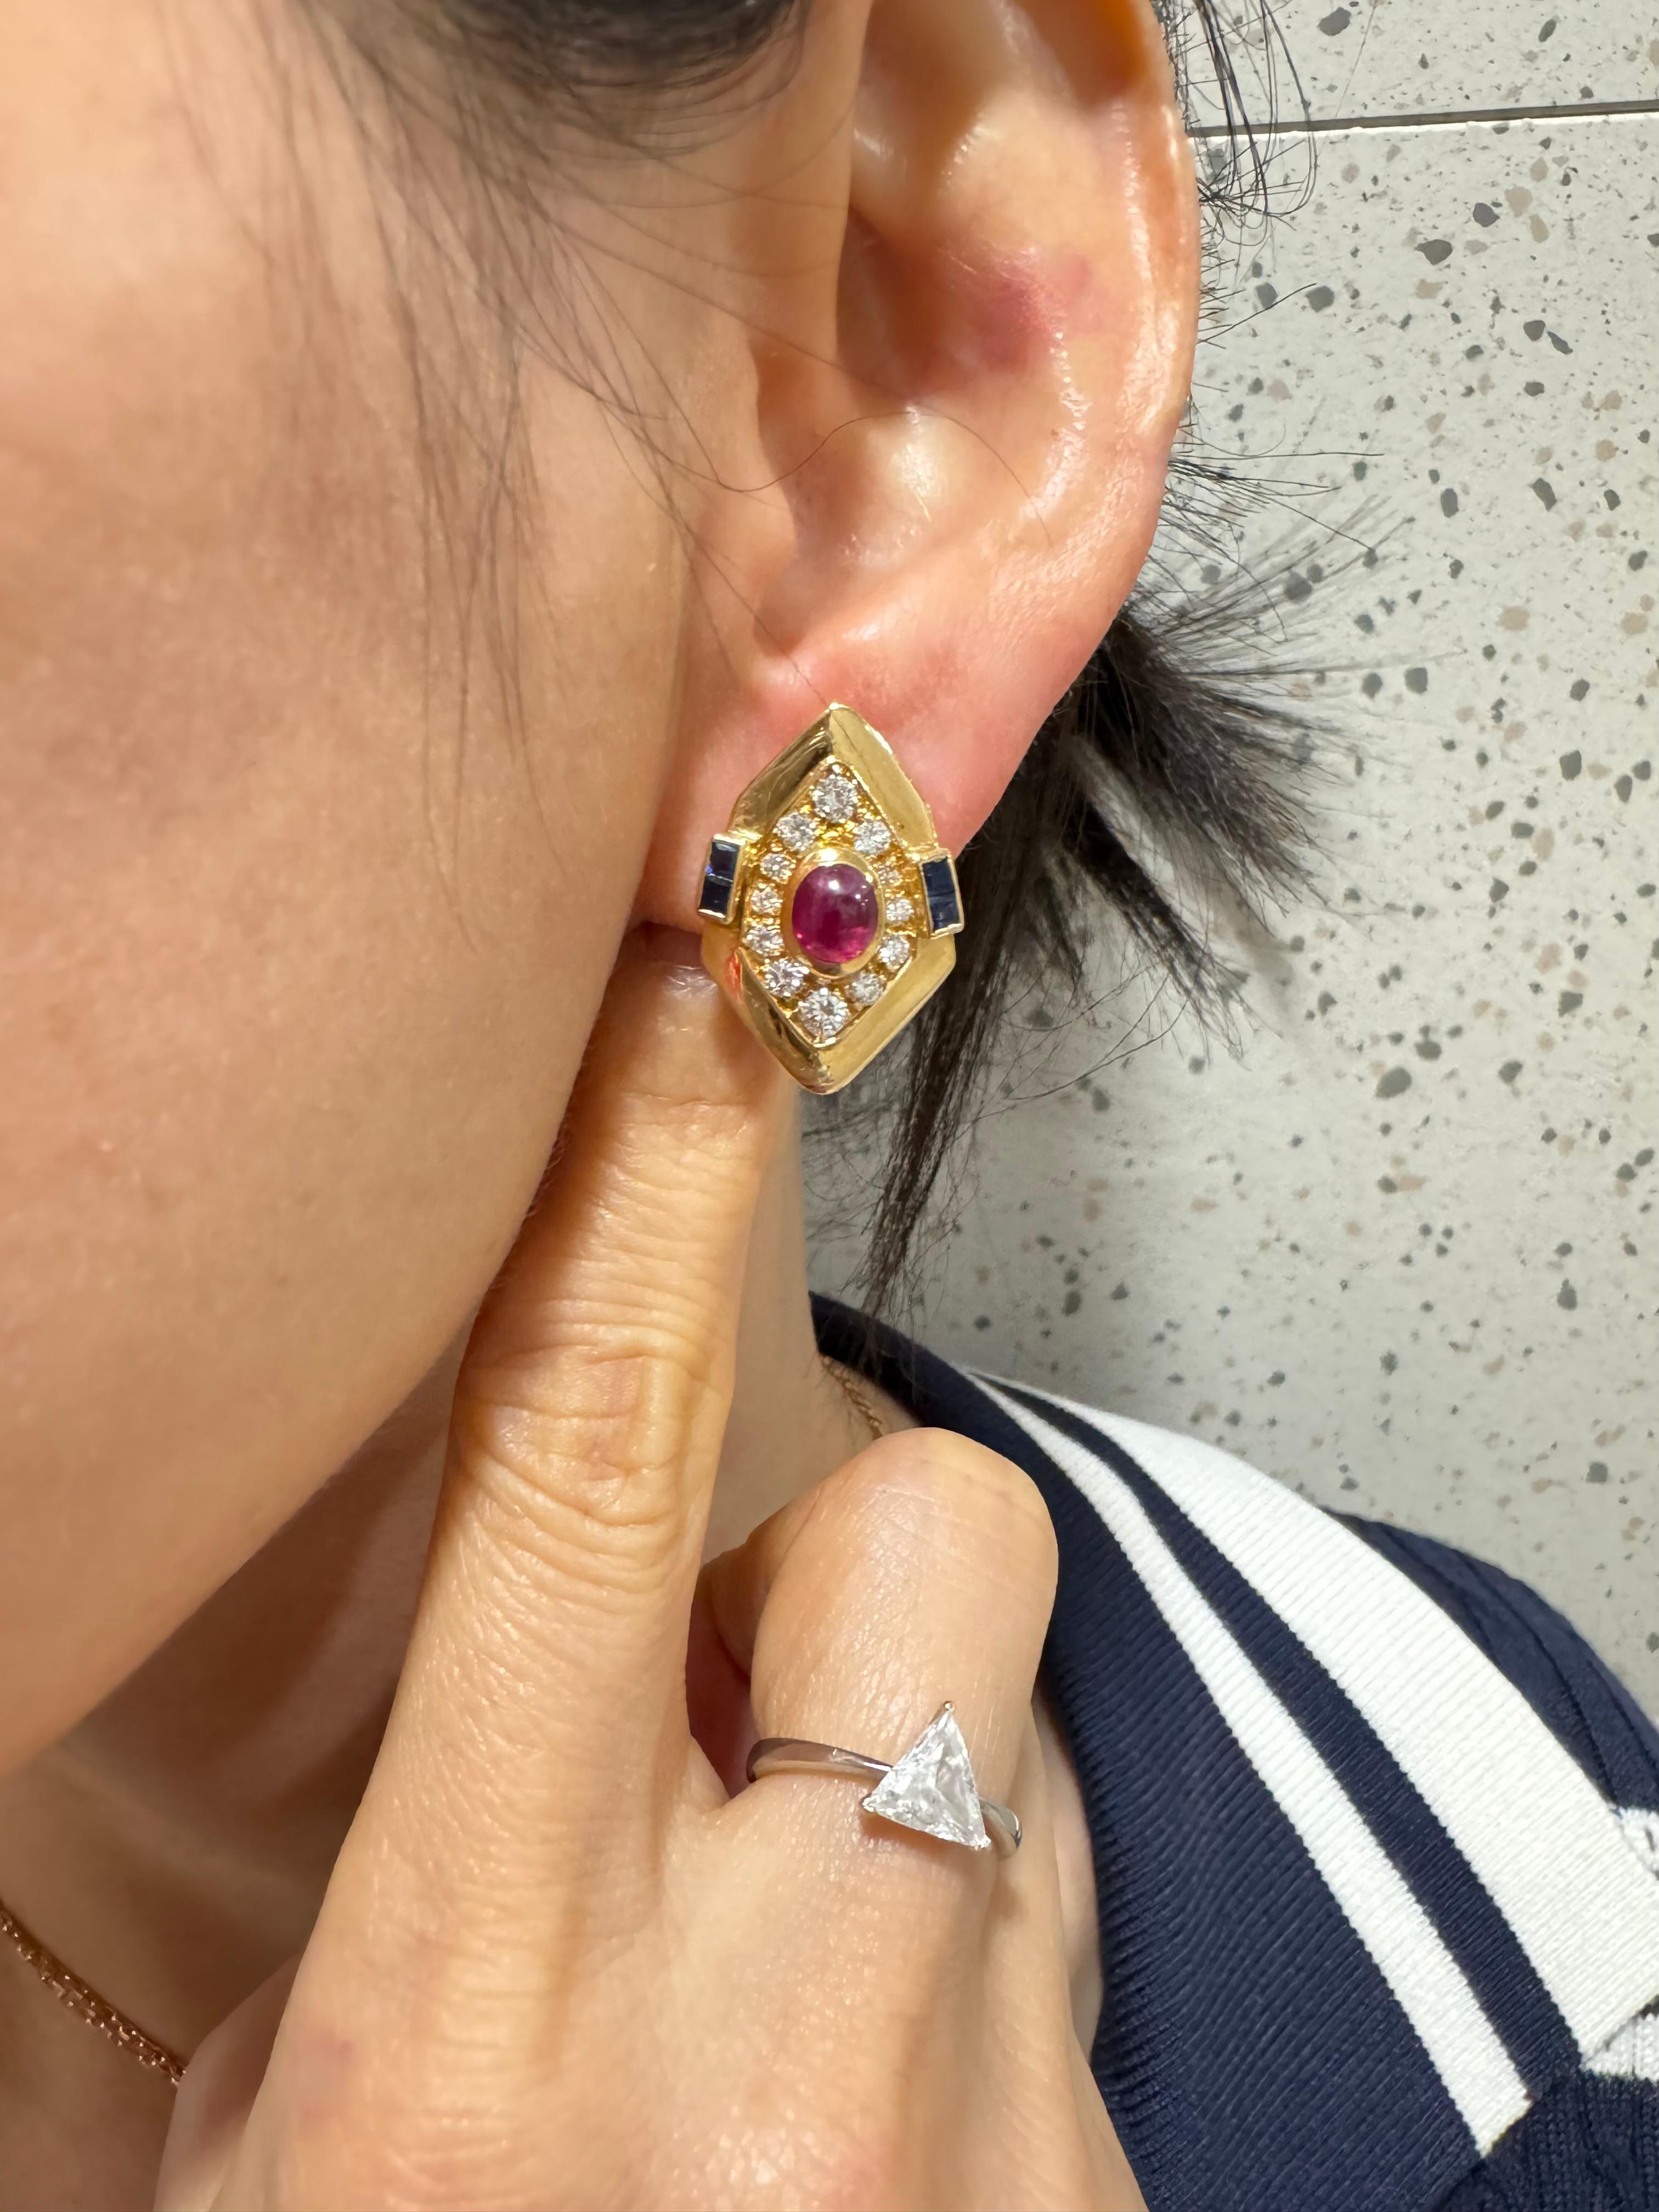 Please check out the HD video! These vintage earrings are very lively!  GIA certified pair of bright red Ruby, blue sapphire and diamond stud earrings. Set in 18k yellow gold, the center red rubies are about 1 cts each totaling 2cts. There are also